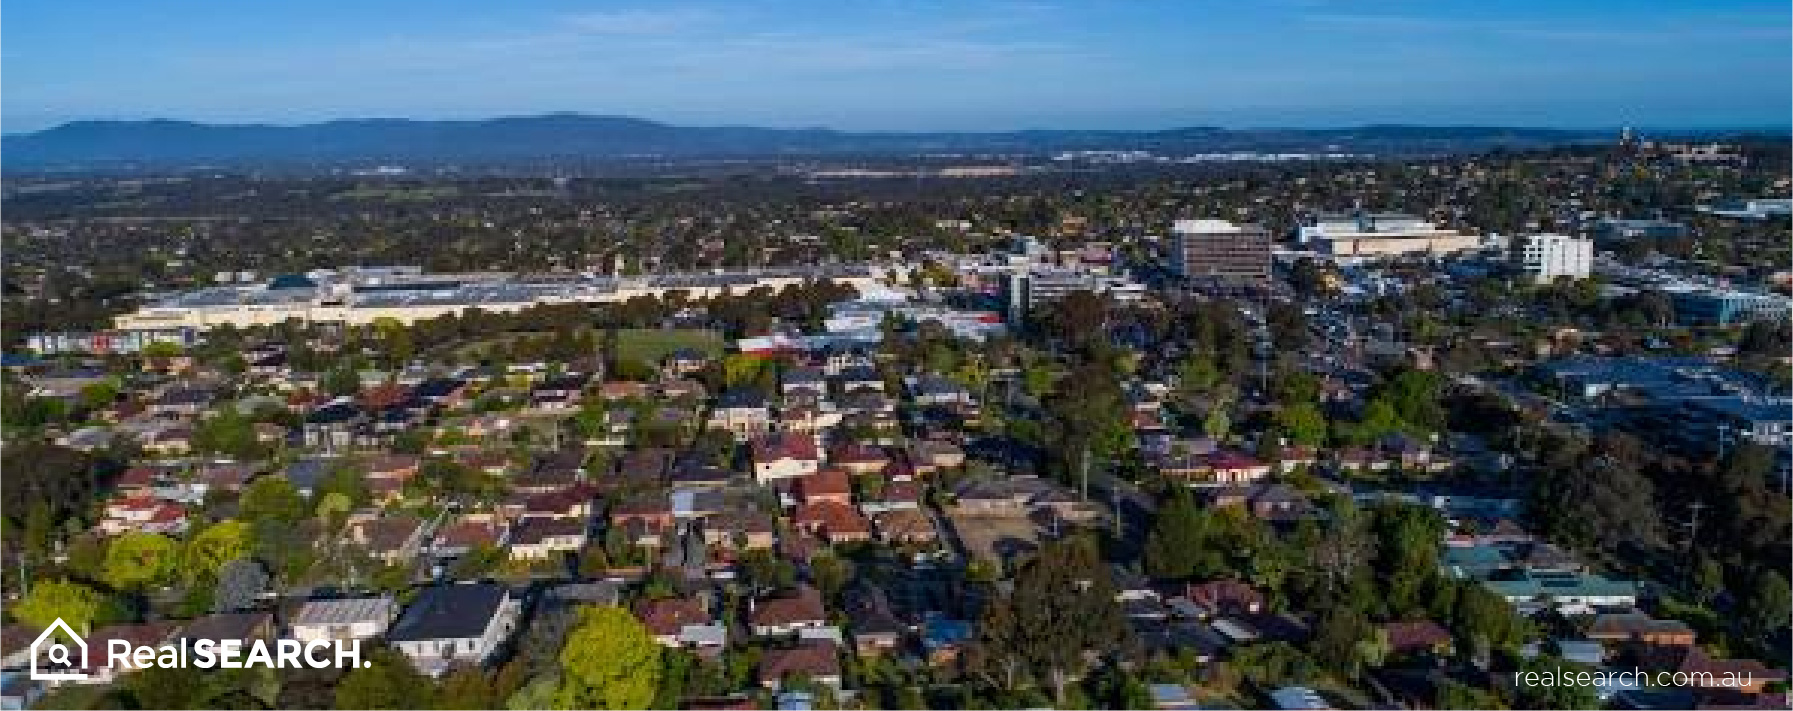 Glen Waverley VIC 3150: A Suburb on the Rise